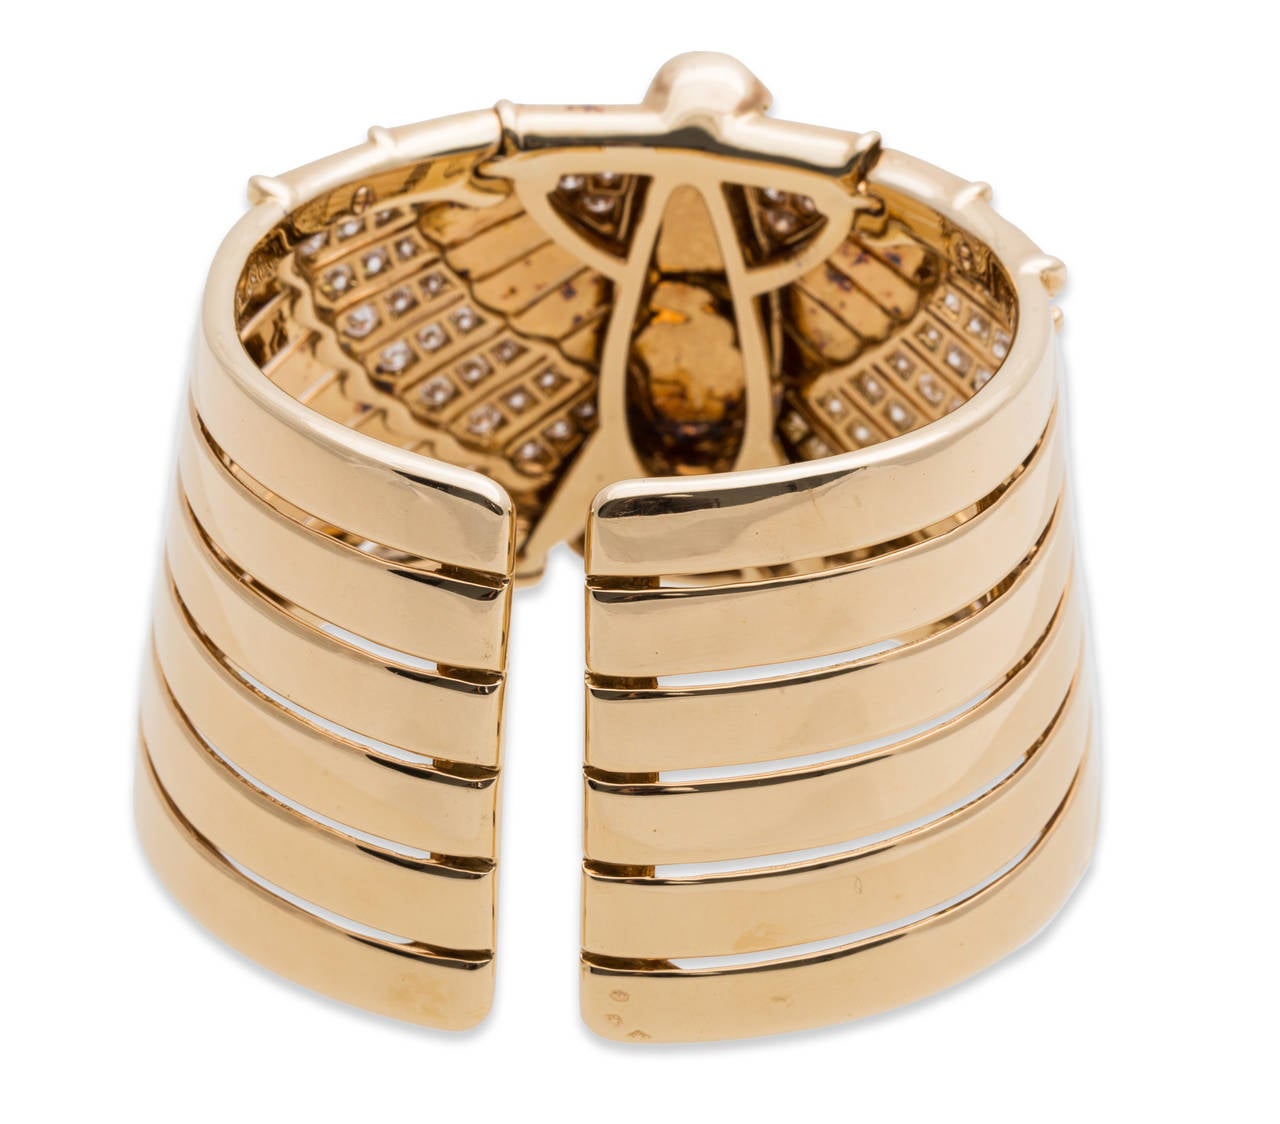 Cartier Egyptian Revival Bracelet in 18K Yellow Gold. Depiction of an Egyptian Eagle with feathers of diamonds. Stamped 